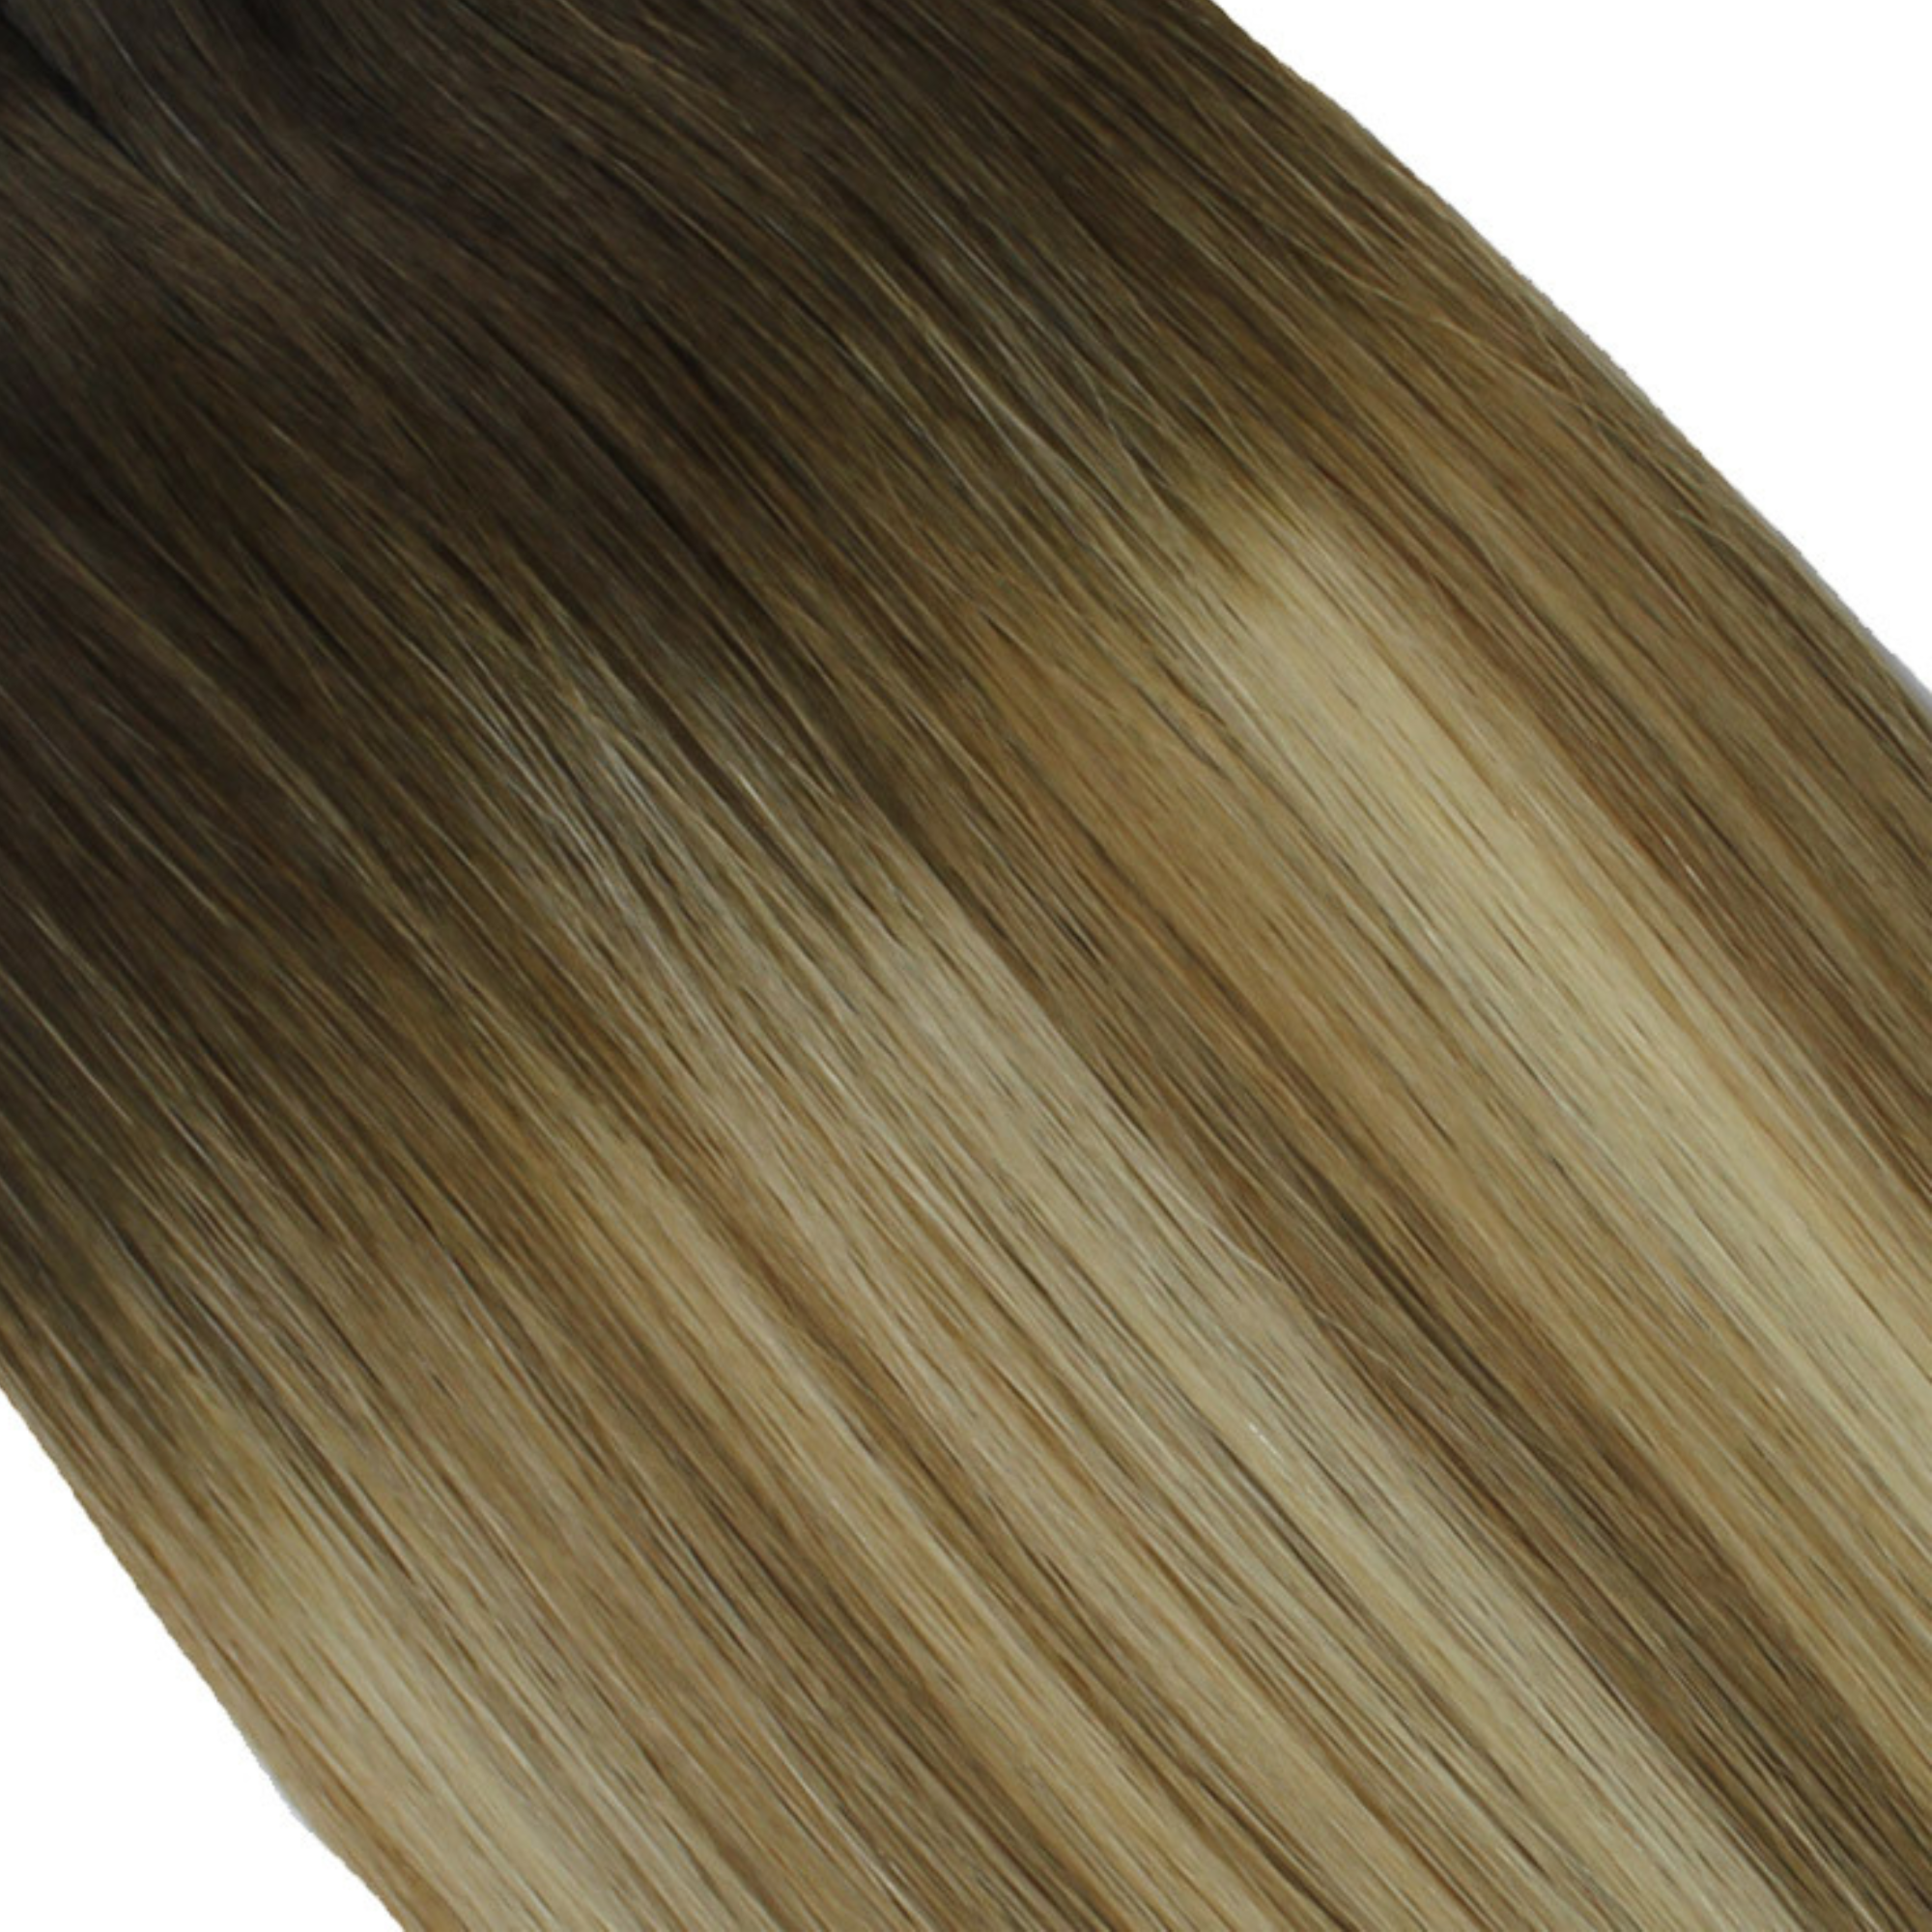 "hair rehab london 18" weft hair extensions shade swatch titled rooted supermodel"